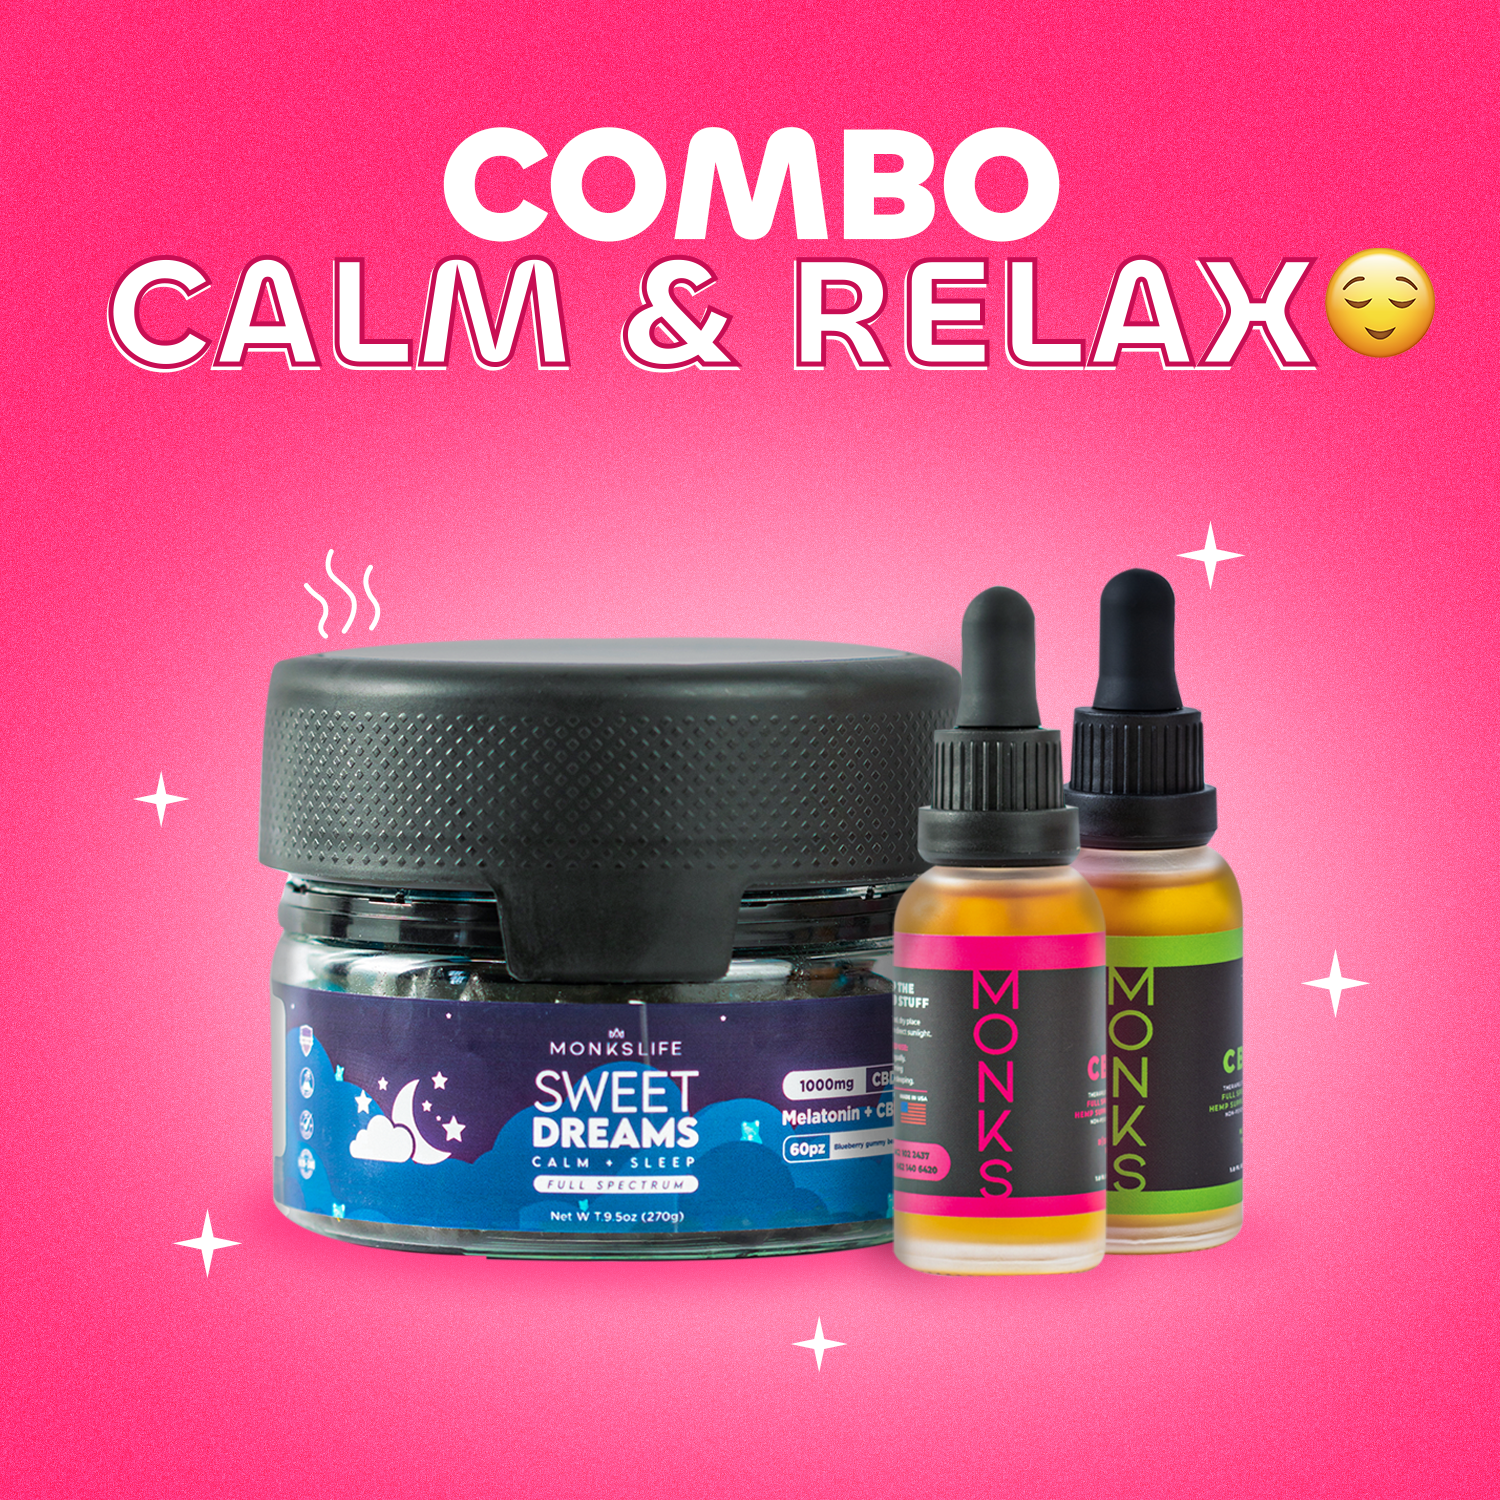 COMBO CALM & RELAX